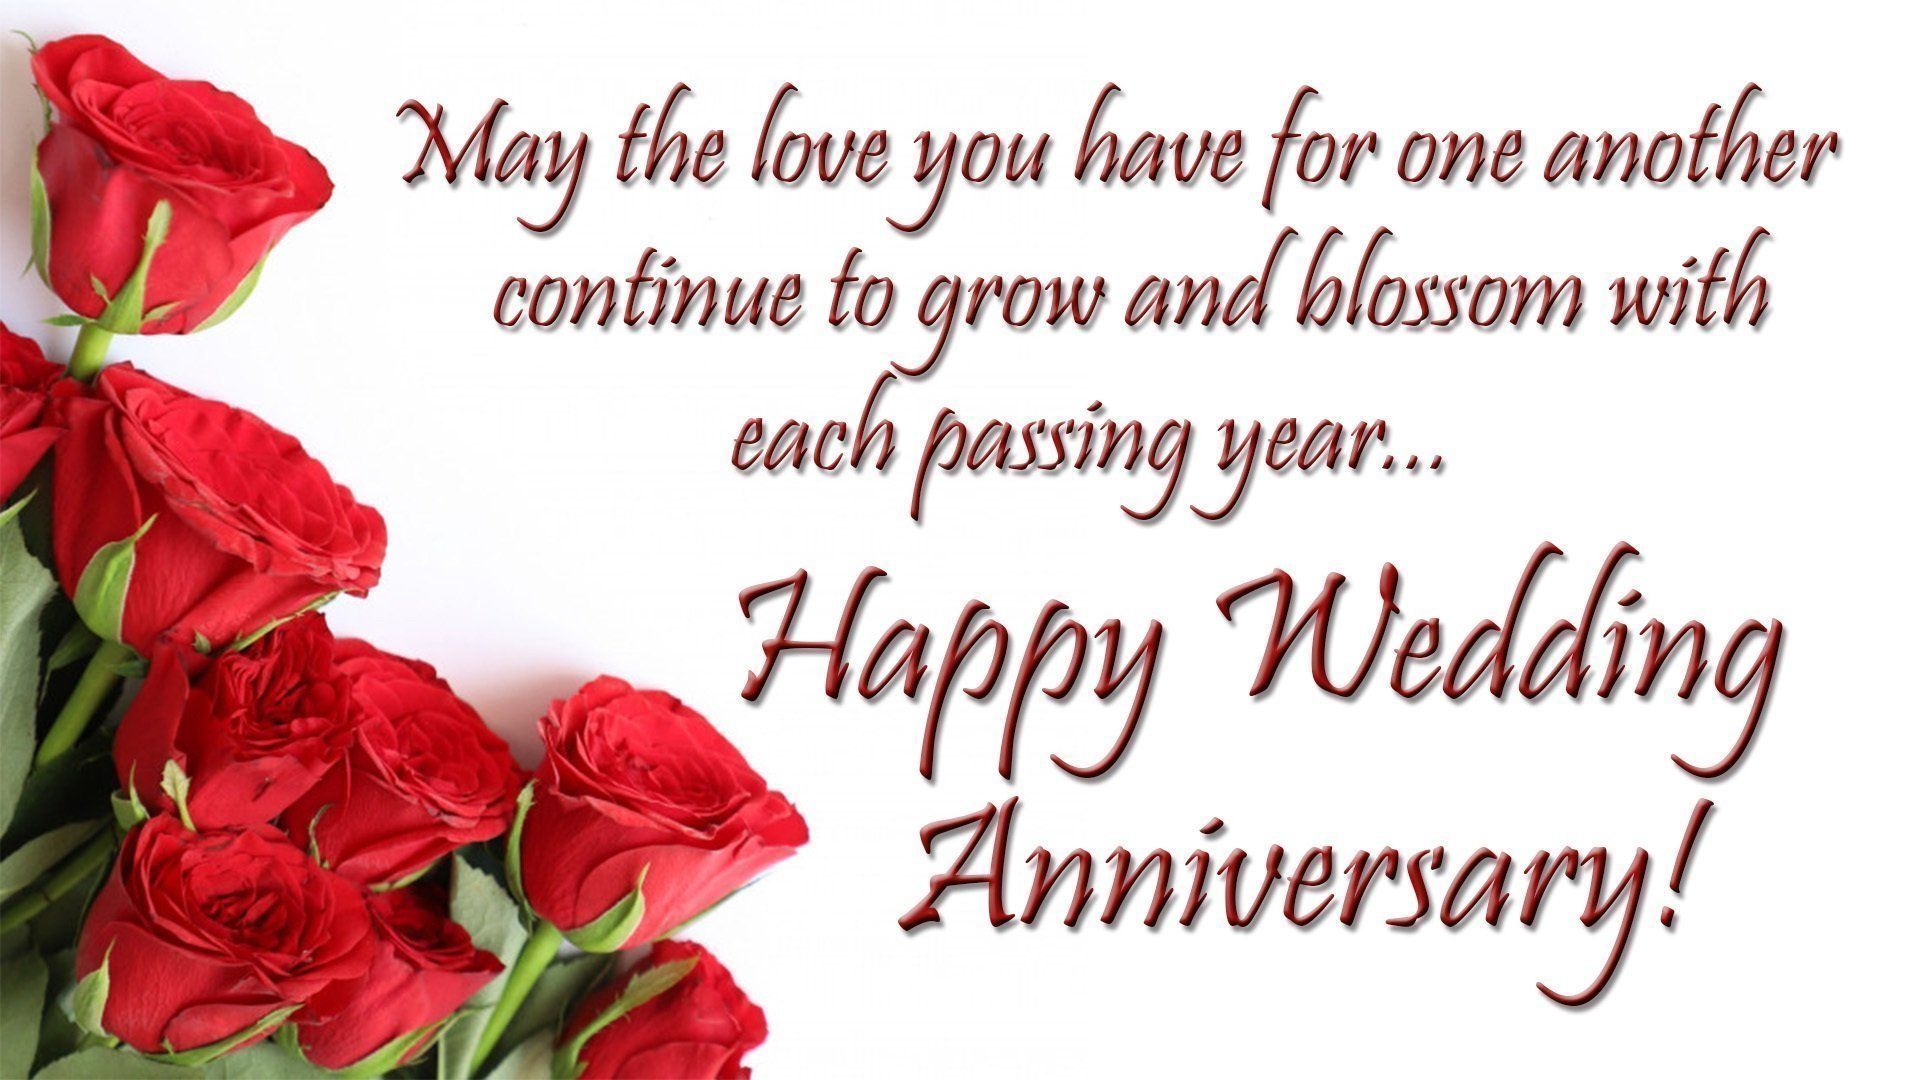 Wishes Happy Wedding Anniversary Best Wishes Saying Image Wallpaper